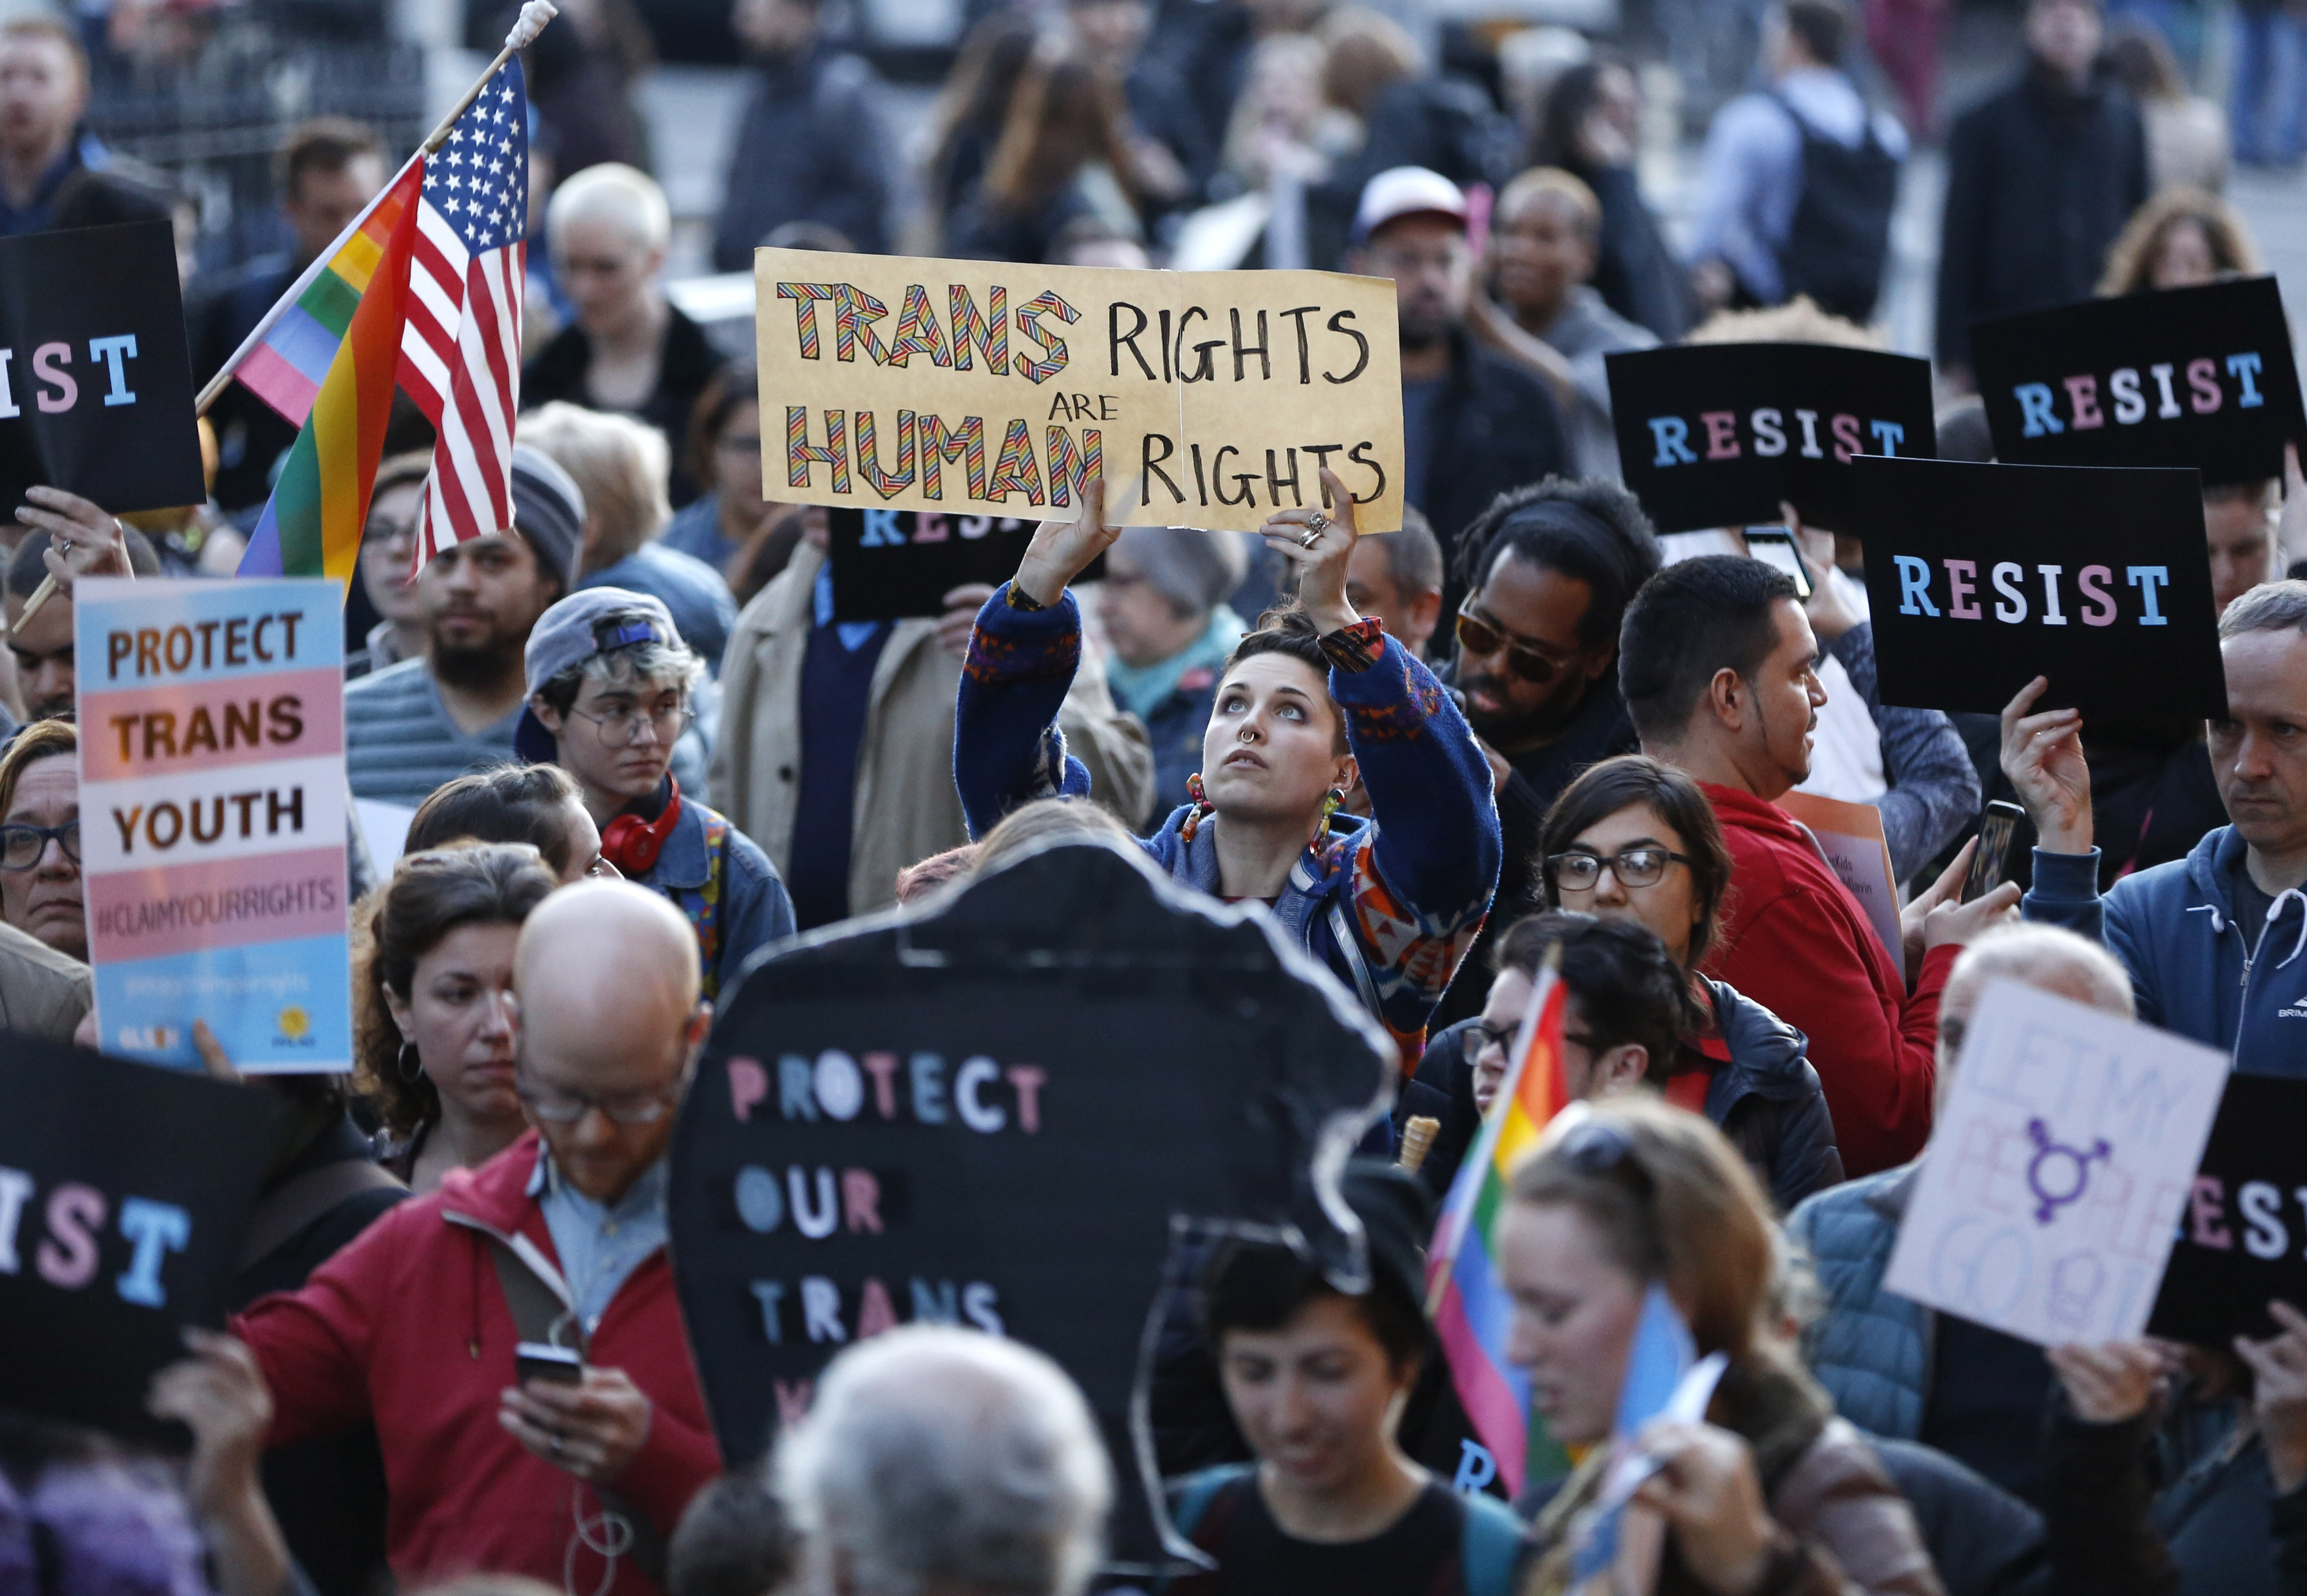 A rally supporting transgender youth in New York.